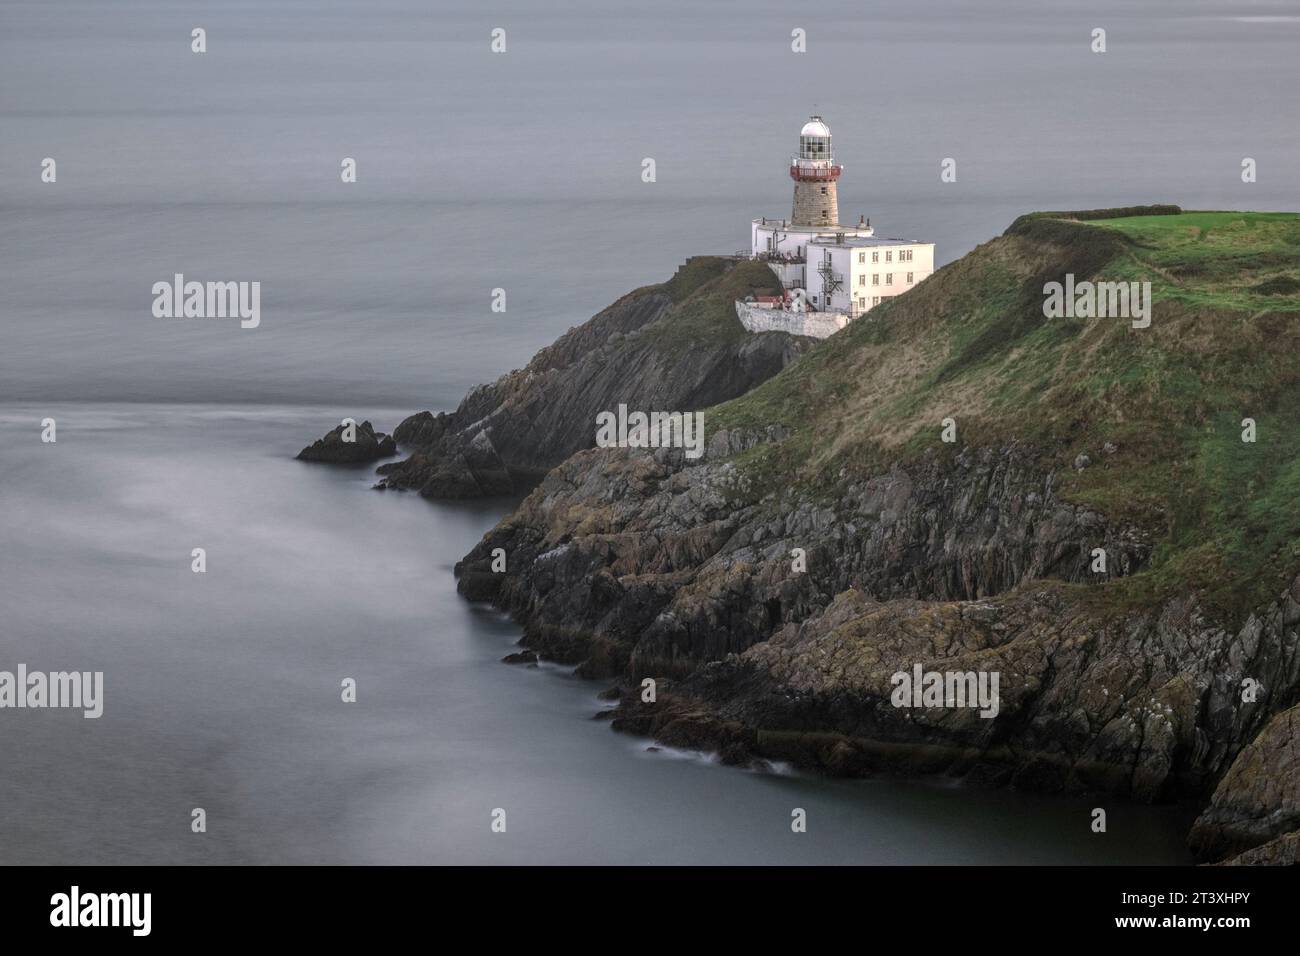 Baily Lighthouse is a lighthouse located on Howth Head, at the tip of the Howth Peninsula in Dublin Bay, Ireland. Stock Photo